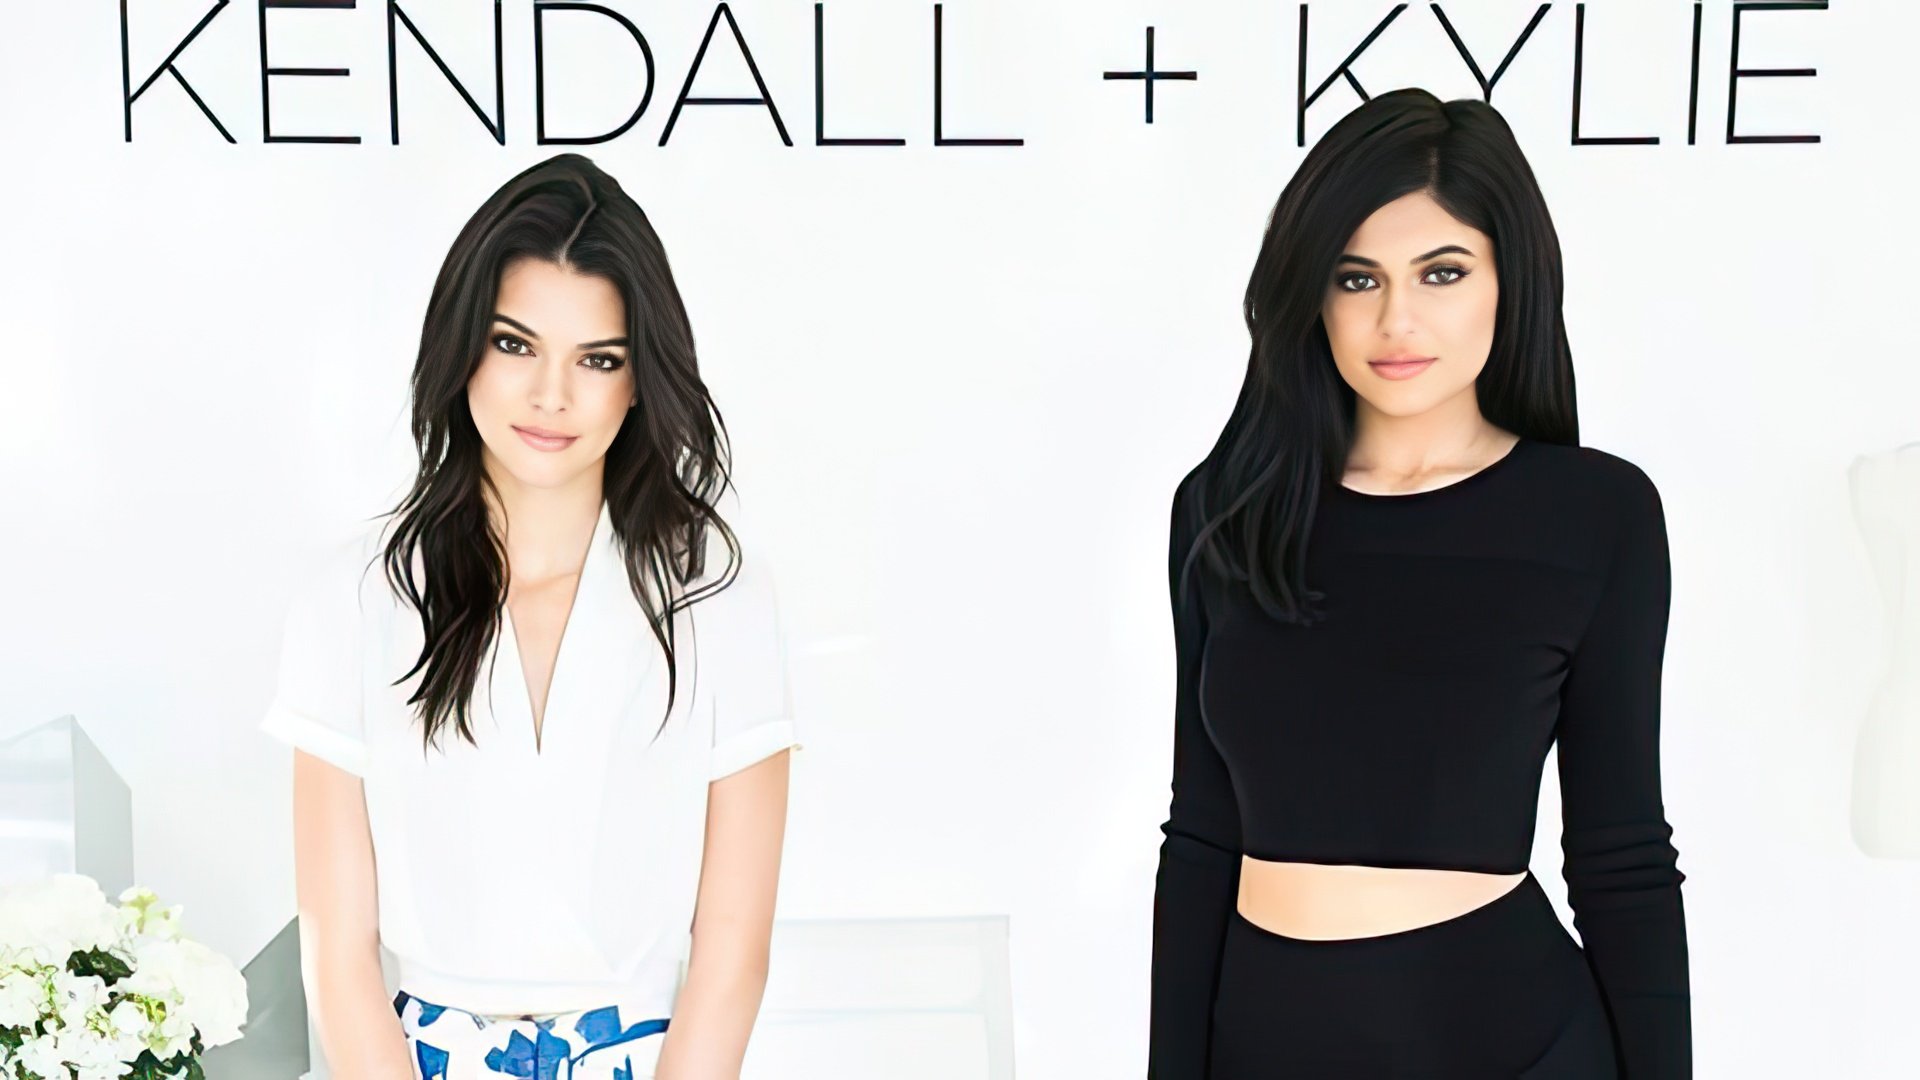 'Kendall + Kylie'